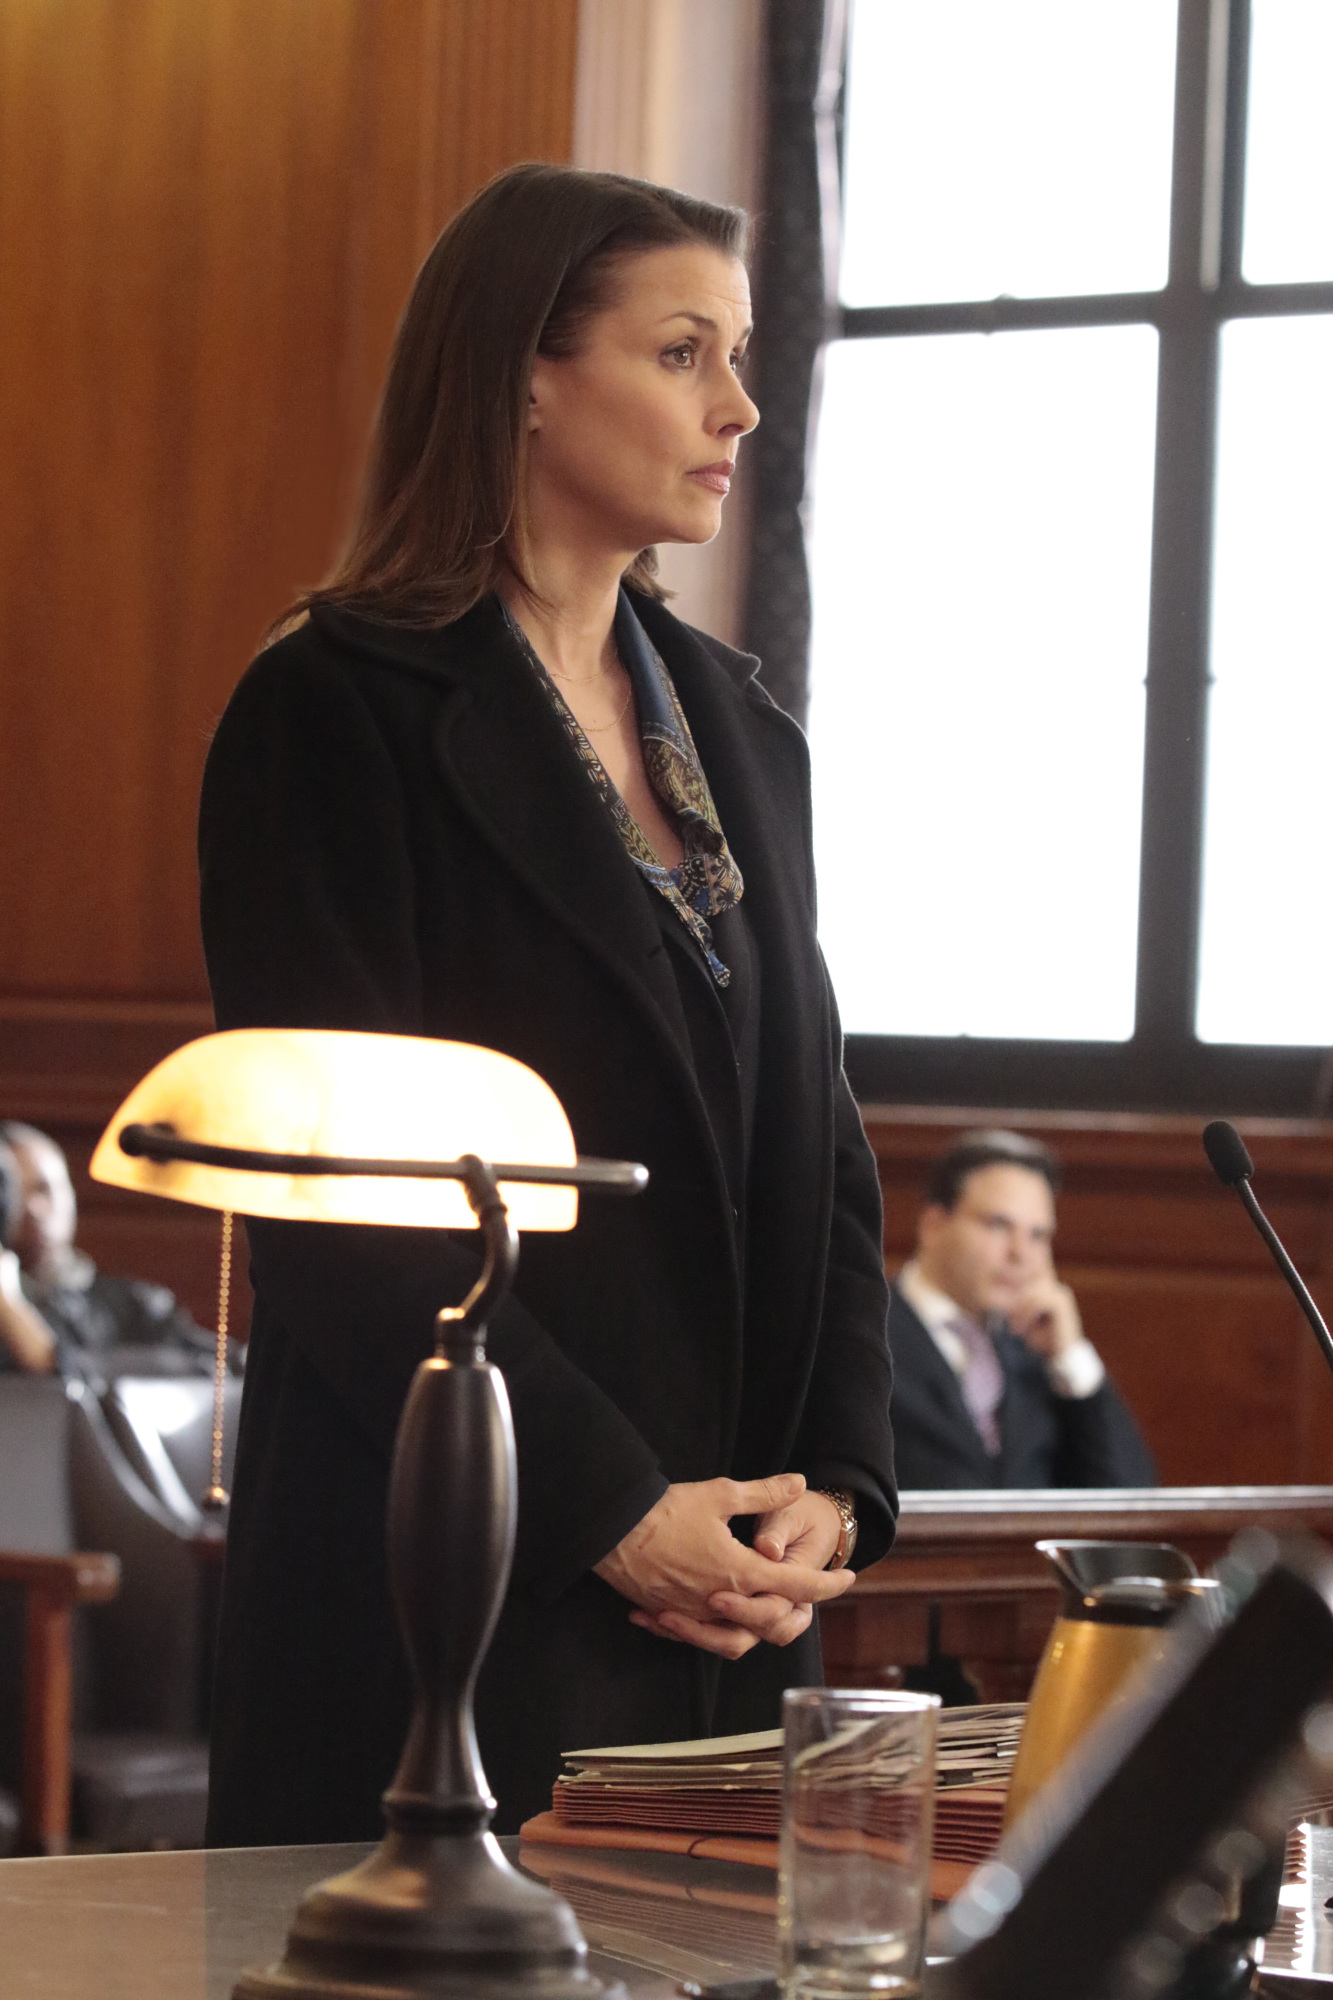 Erin Reagan stands in front of the judge.